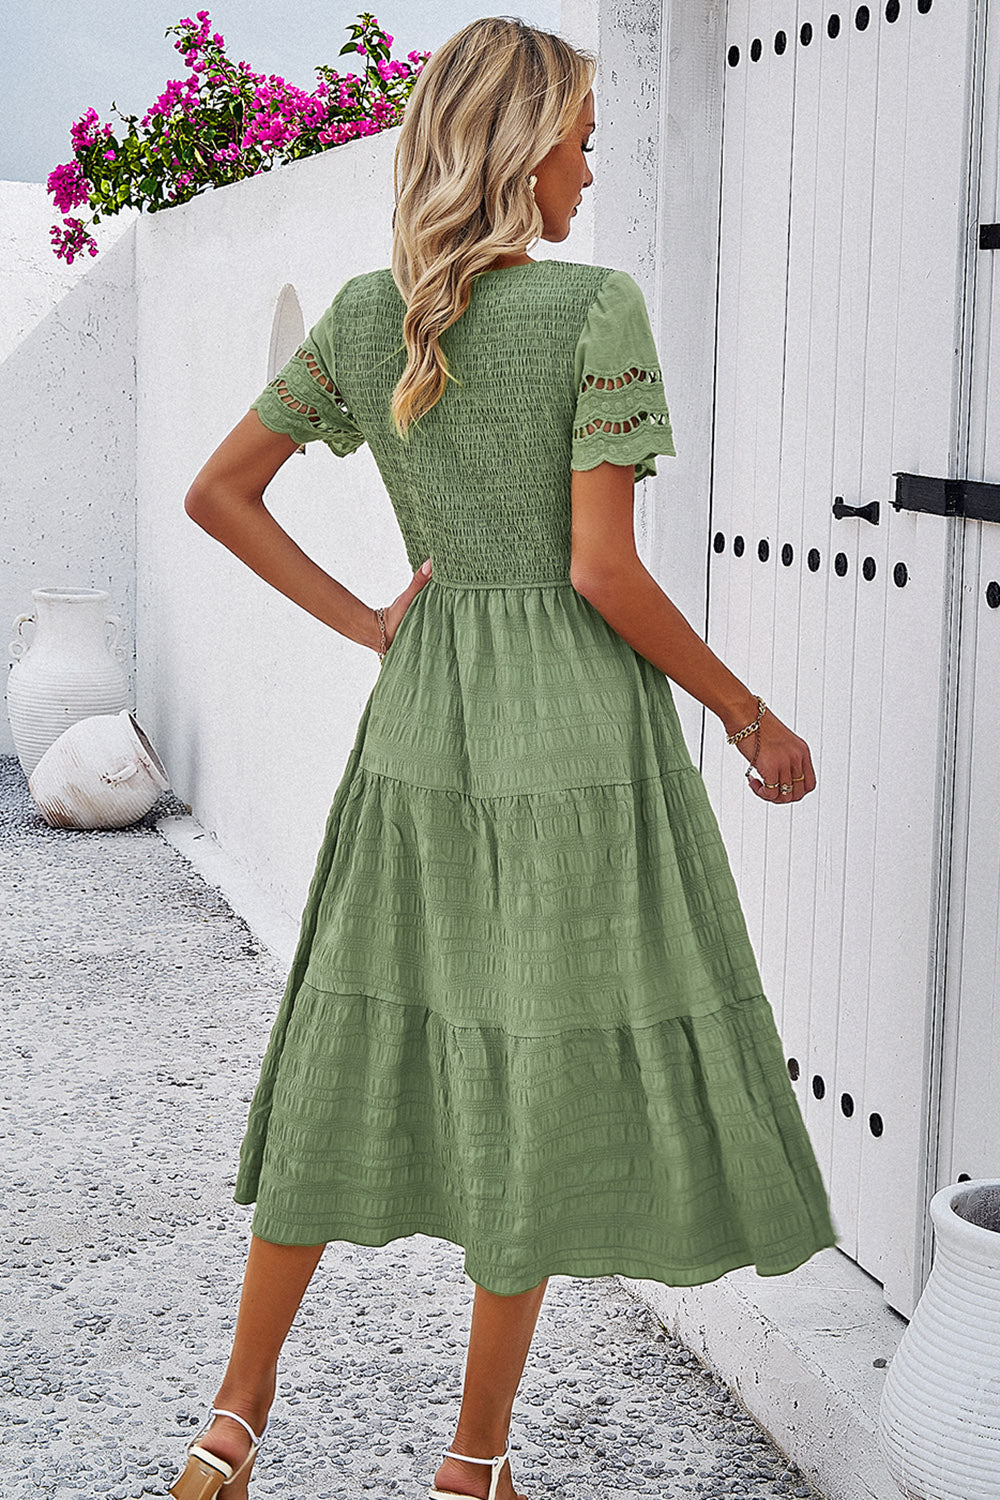 Discover elegance with our Smocked Midi Dress, perfect for any occasion. Comfort meets style in five beautiful colors.